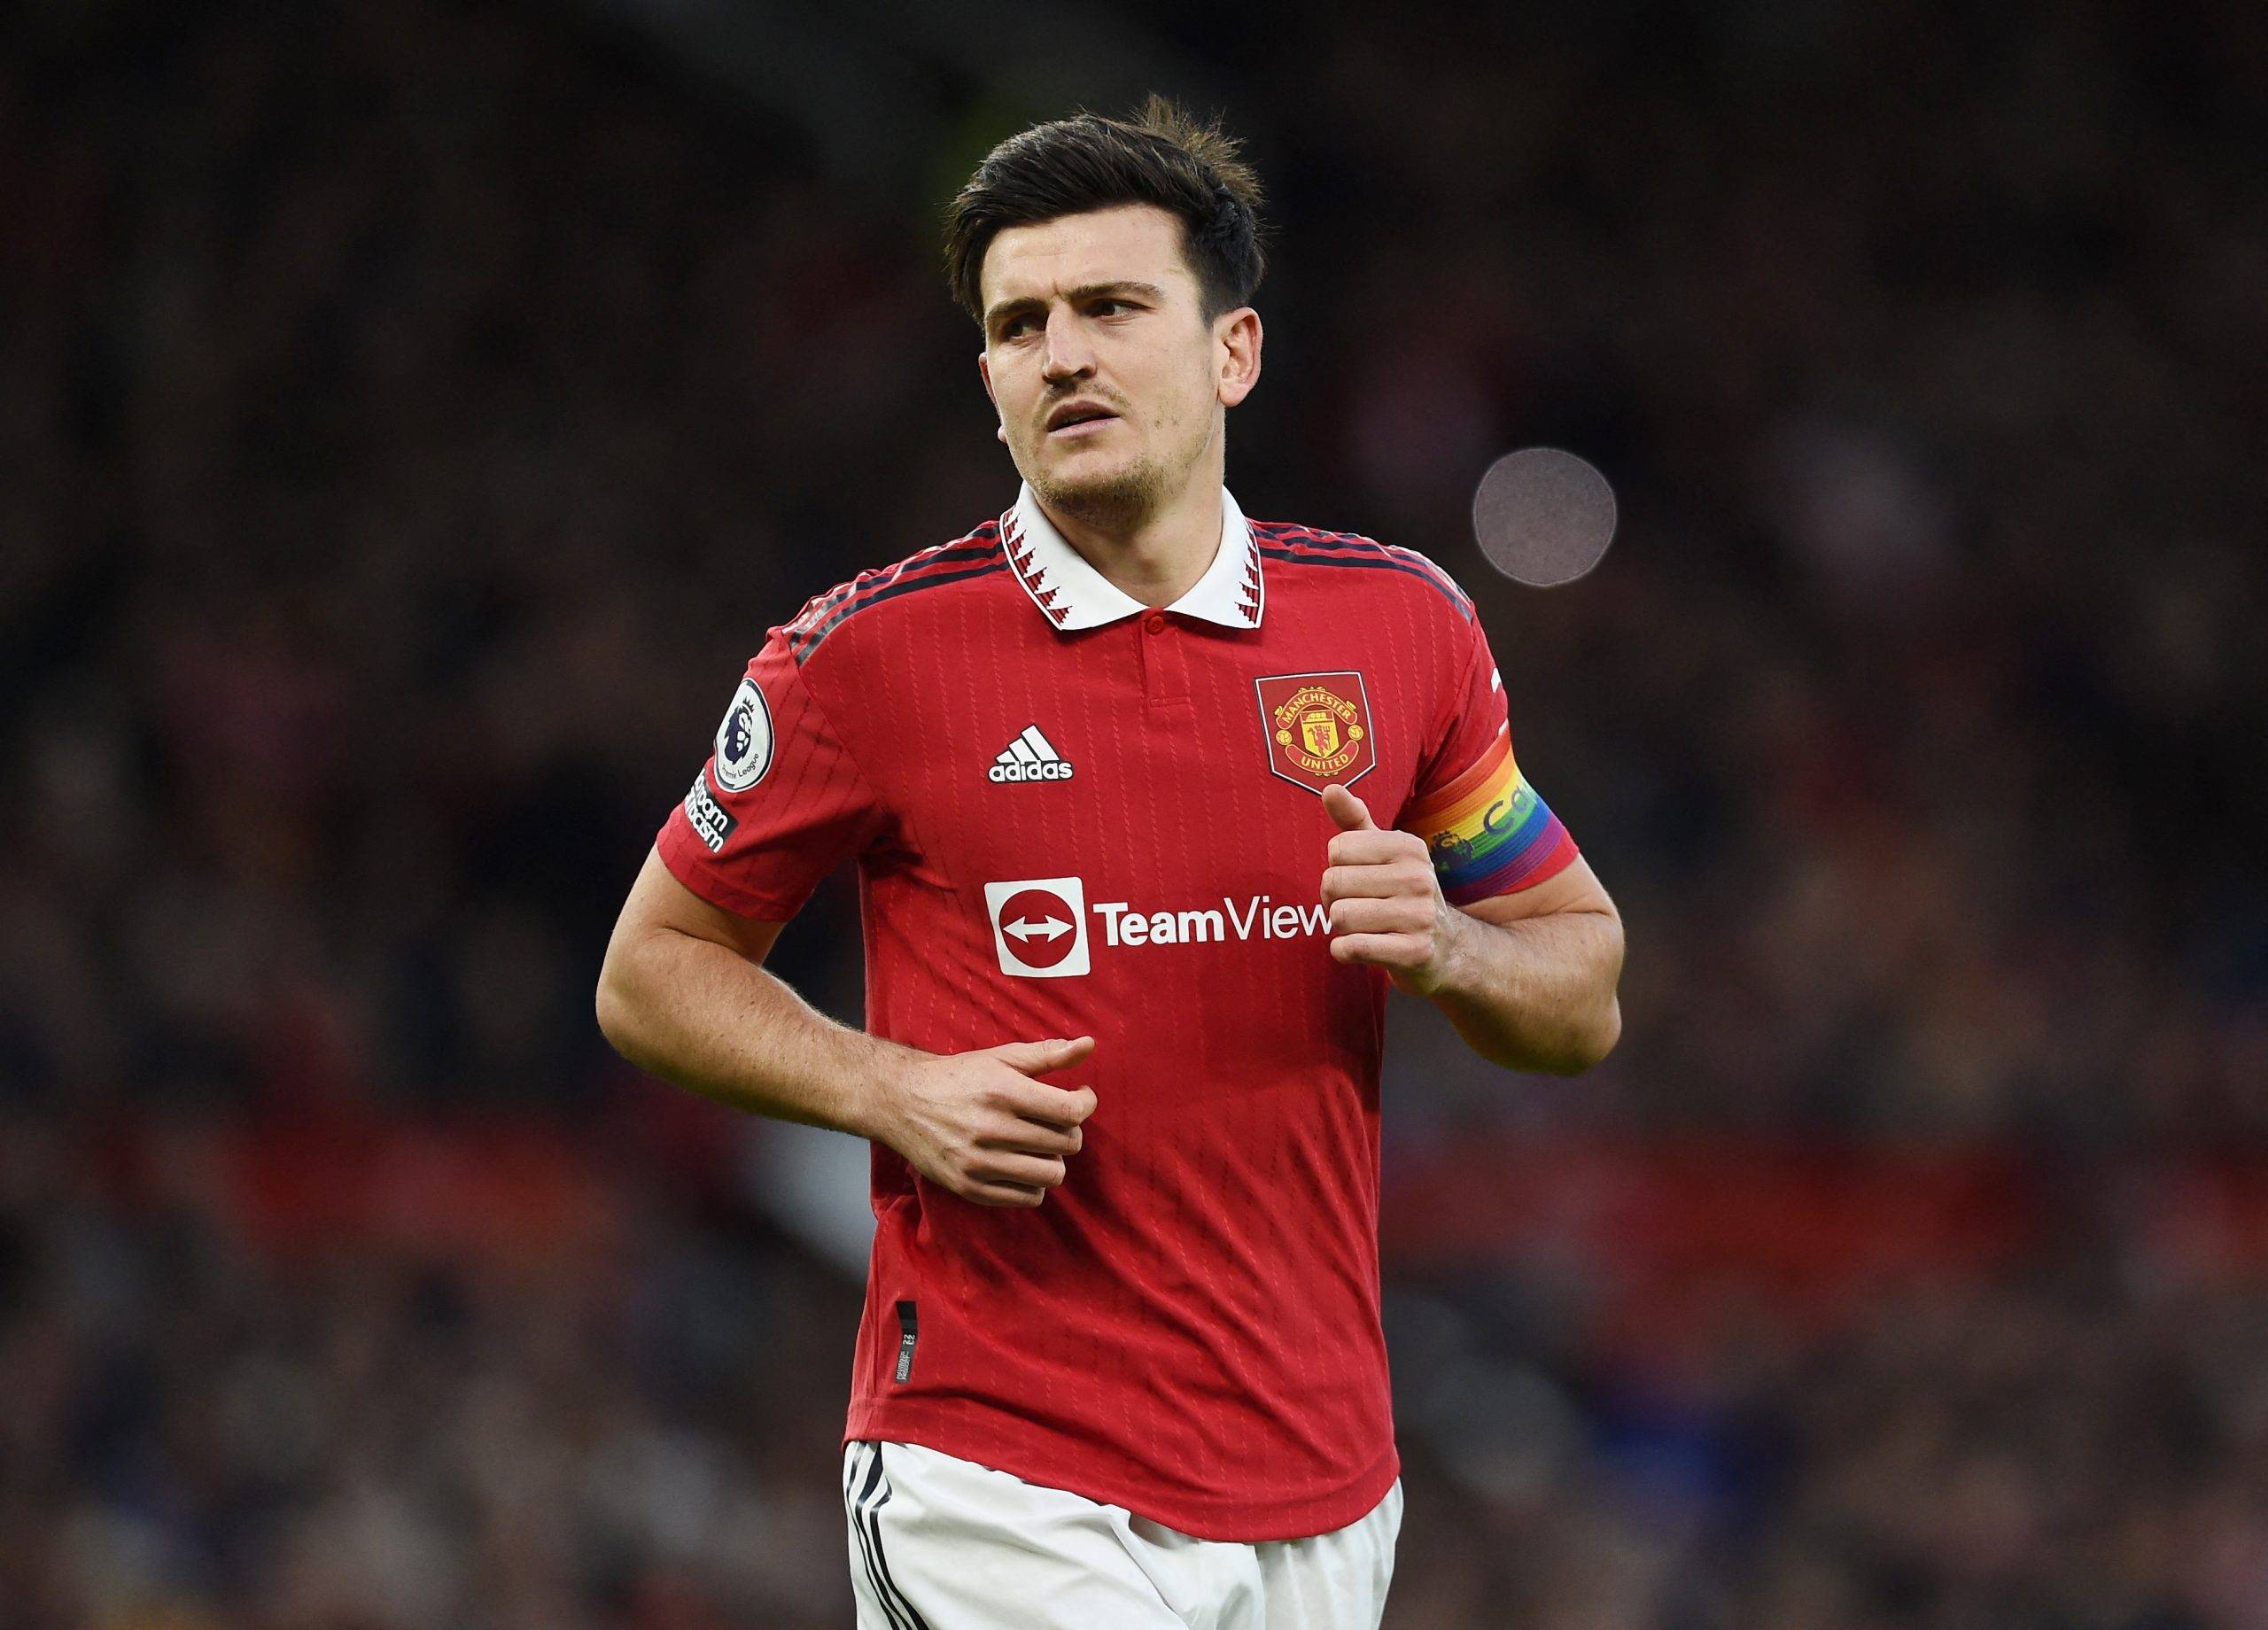 Manchester United: Journalist hints at supporters groaning at Harry Maguire - Manchester United News